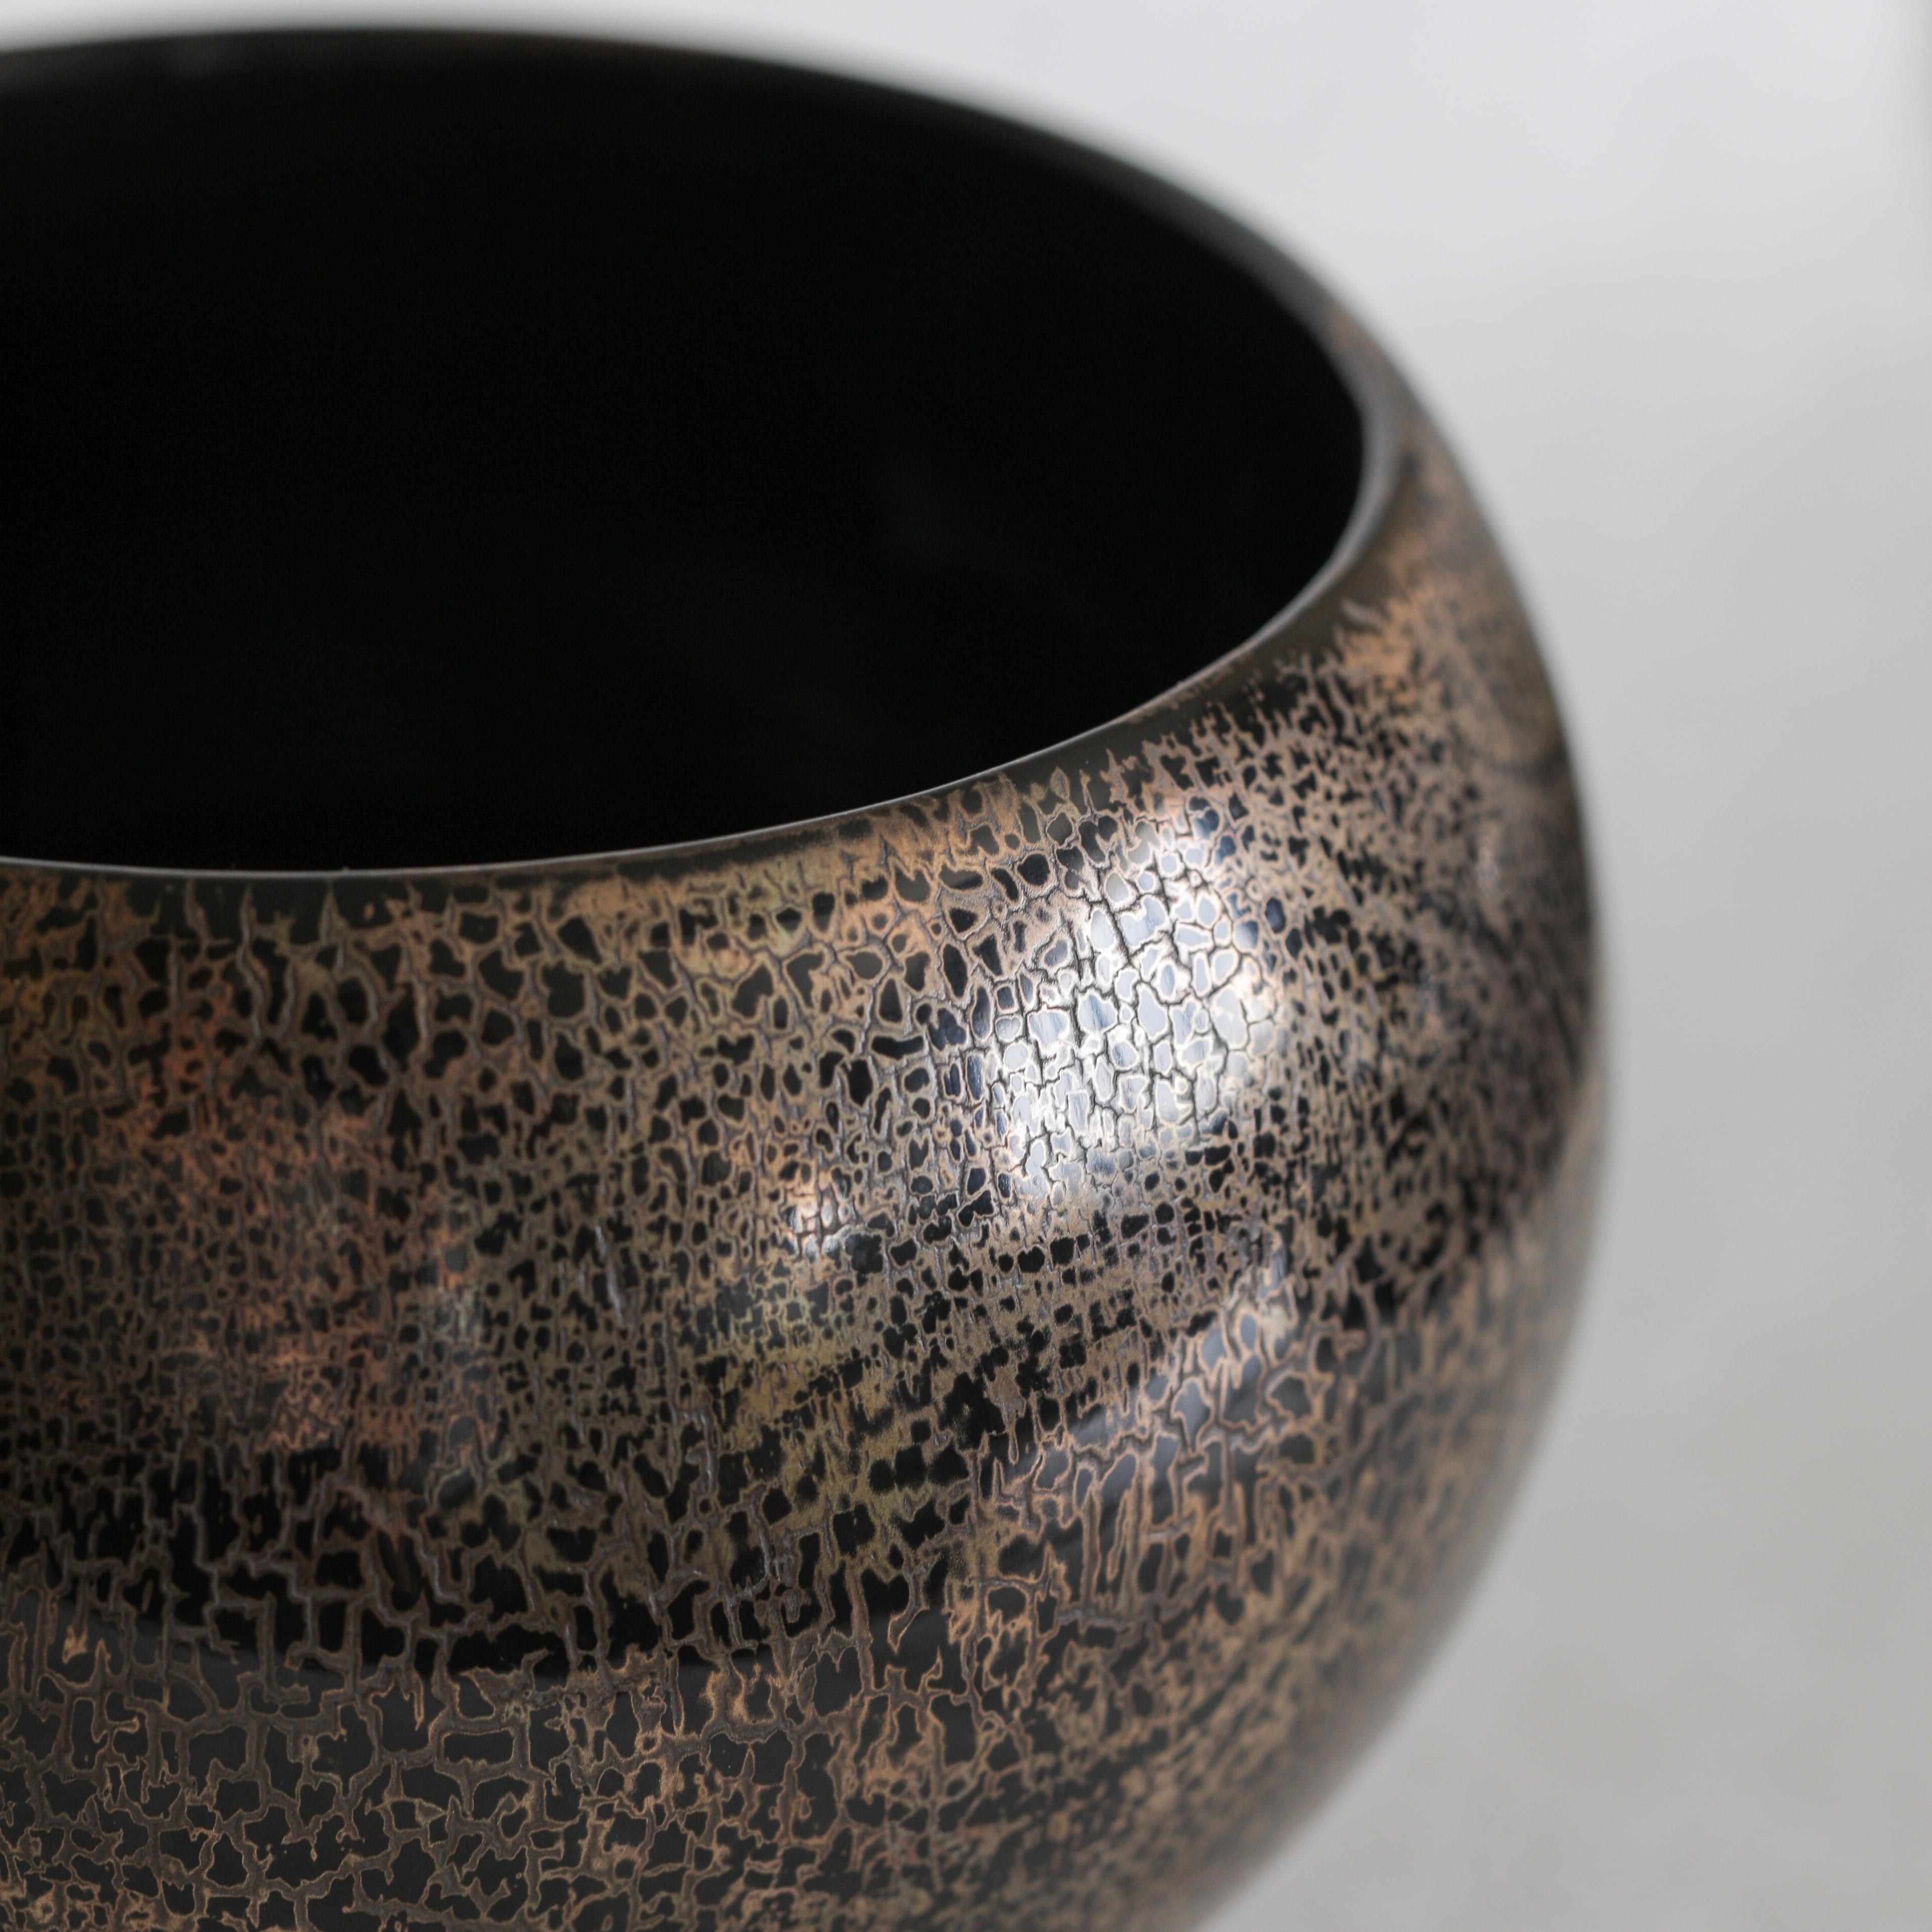 Pure bowl forms that glow with light and dark. From the latin for 'fire', these bowls suggest a charred stratified beauty that is in fact created with the application of layers of lacquer and leaf.